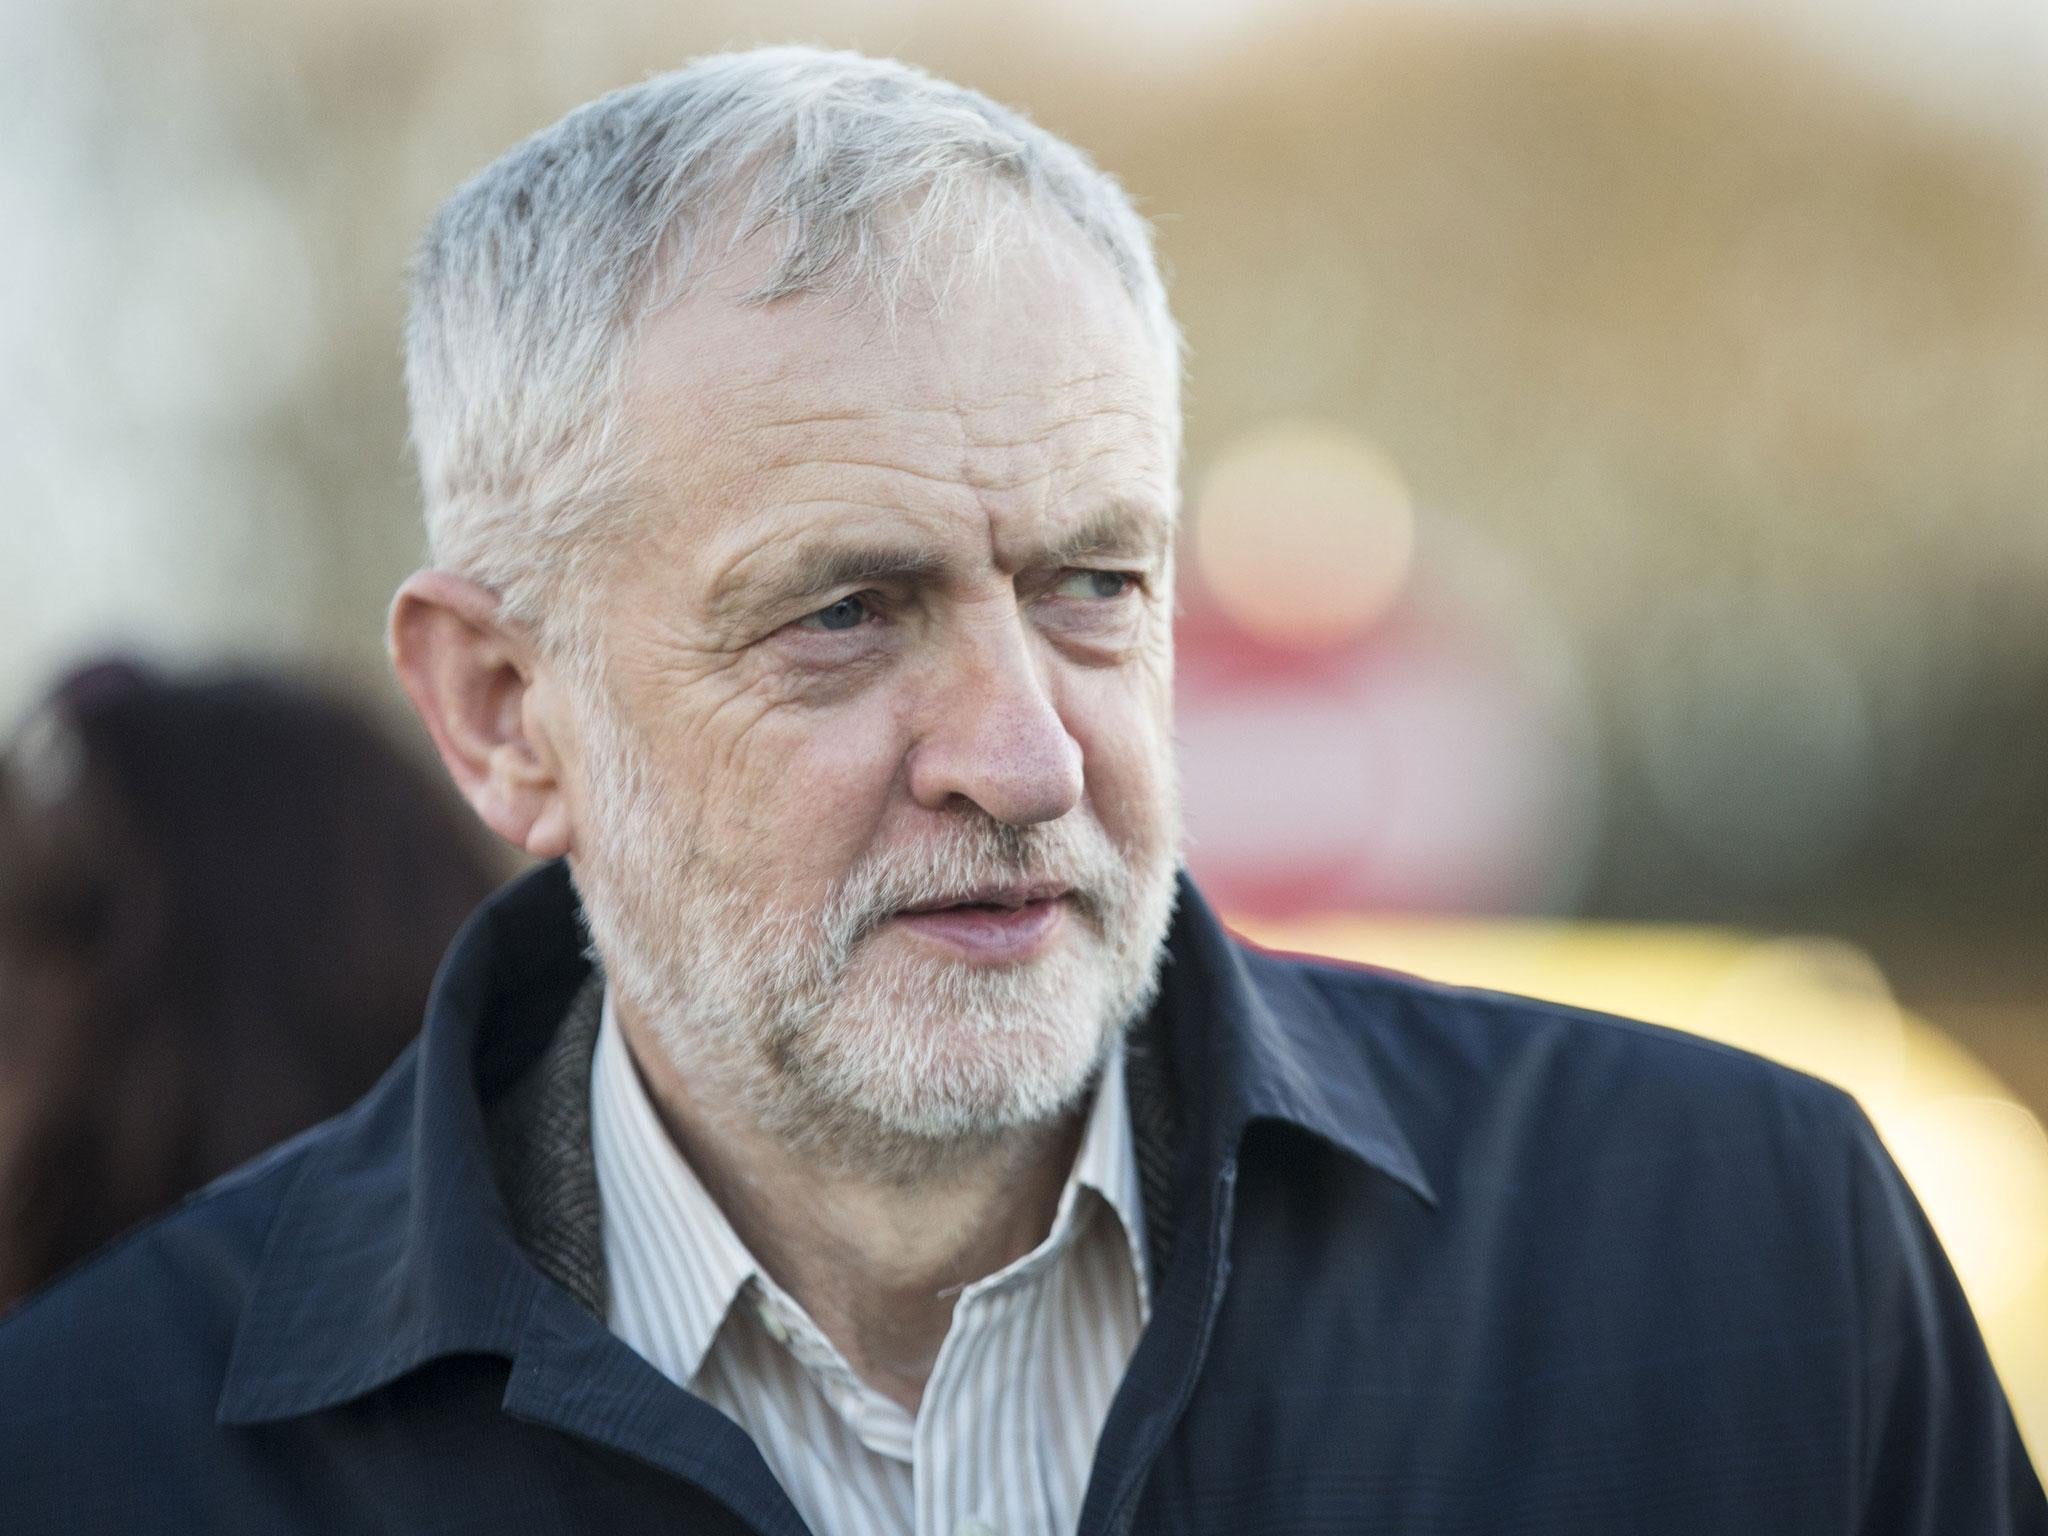 Corbyn now represents a Labour Party that supports Brexit